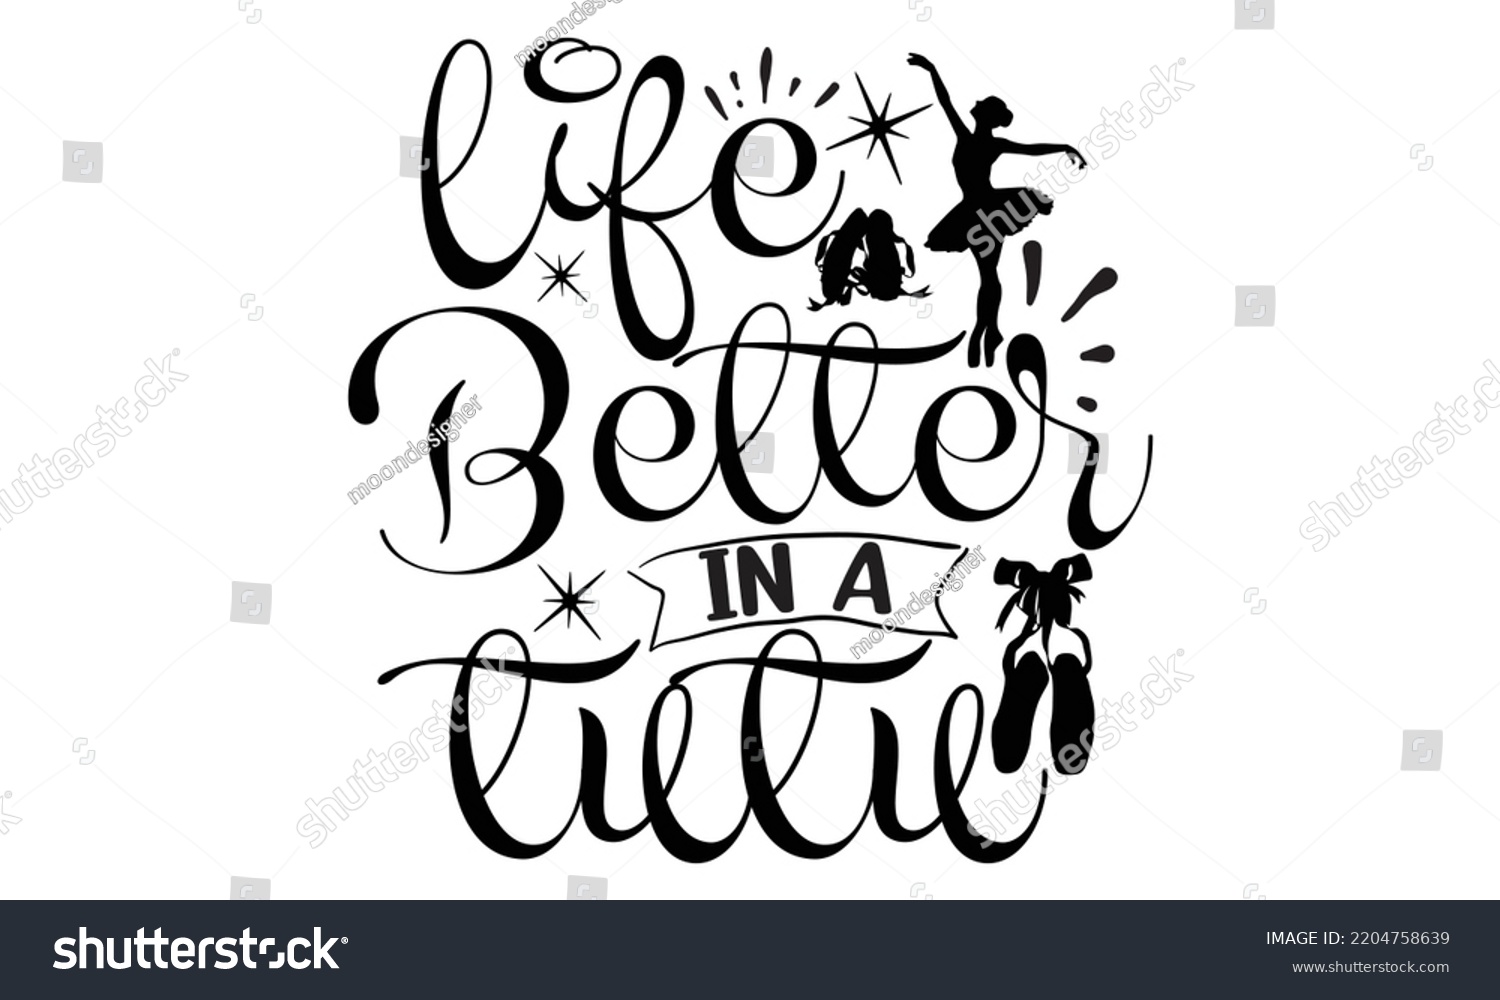 SVG of life better in a tutu - Ballet svg t shirt design, ballet SVG Cut Files, Girl Ballet Design, Hand drawn lettering phrase and vector sign, EPS 10 svg